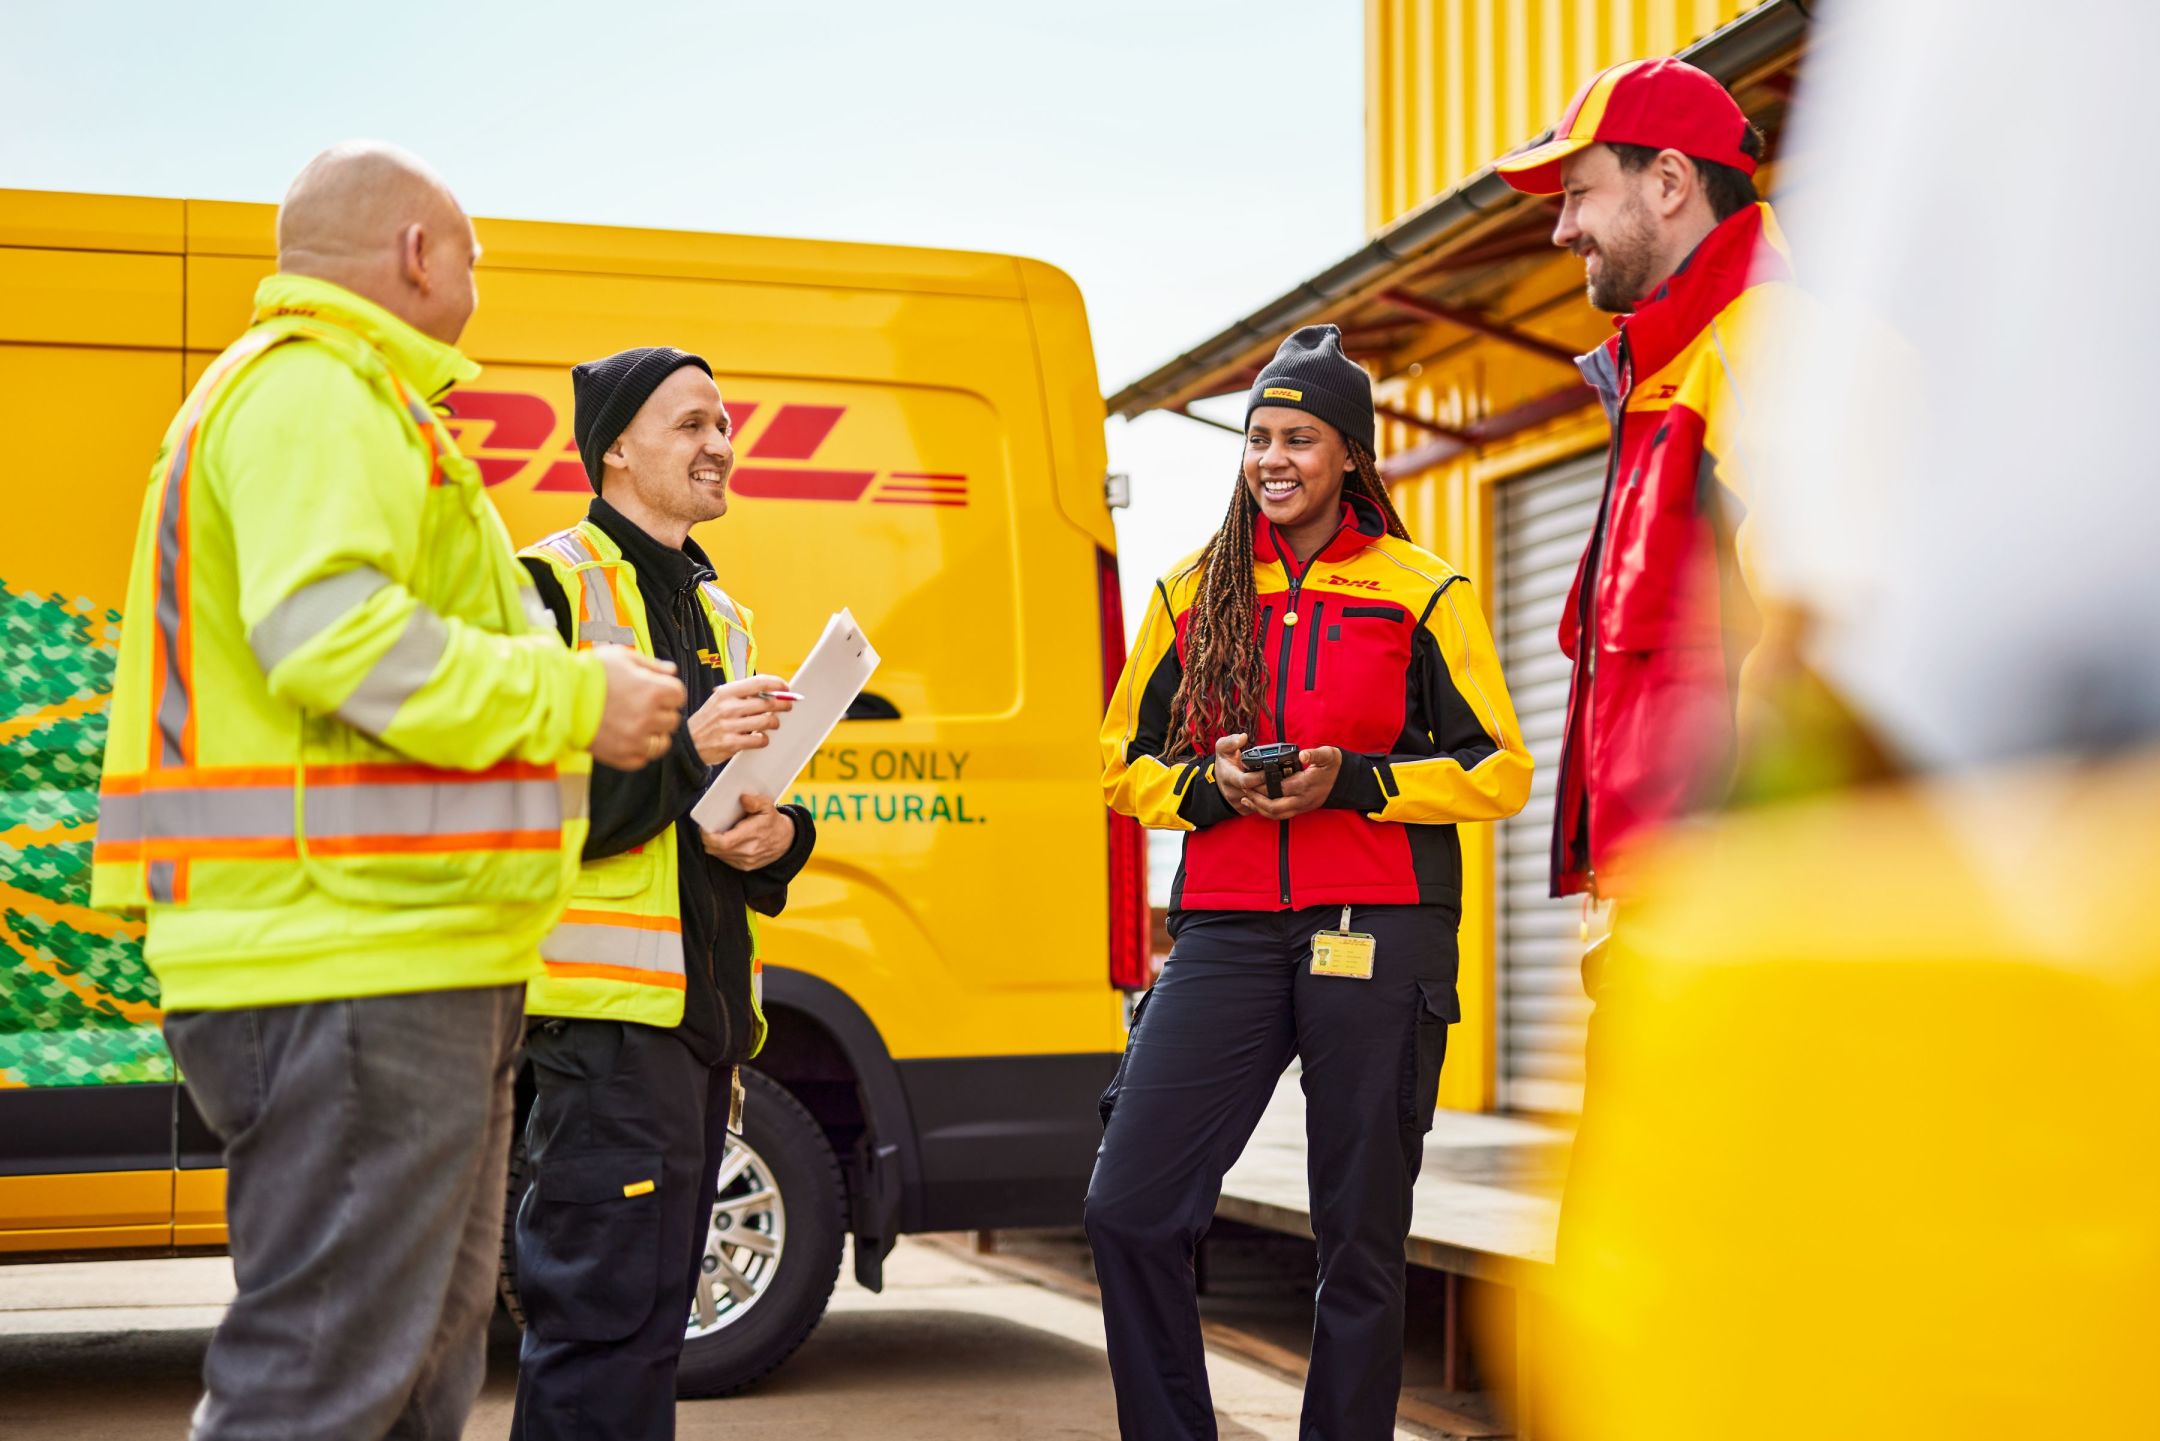 DHL employee interaction